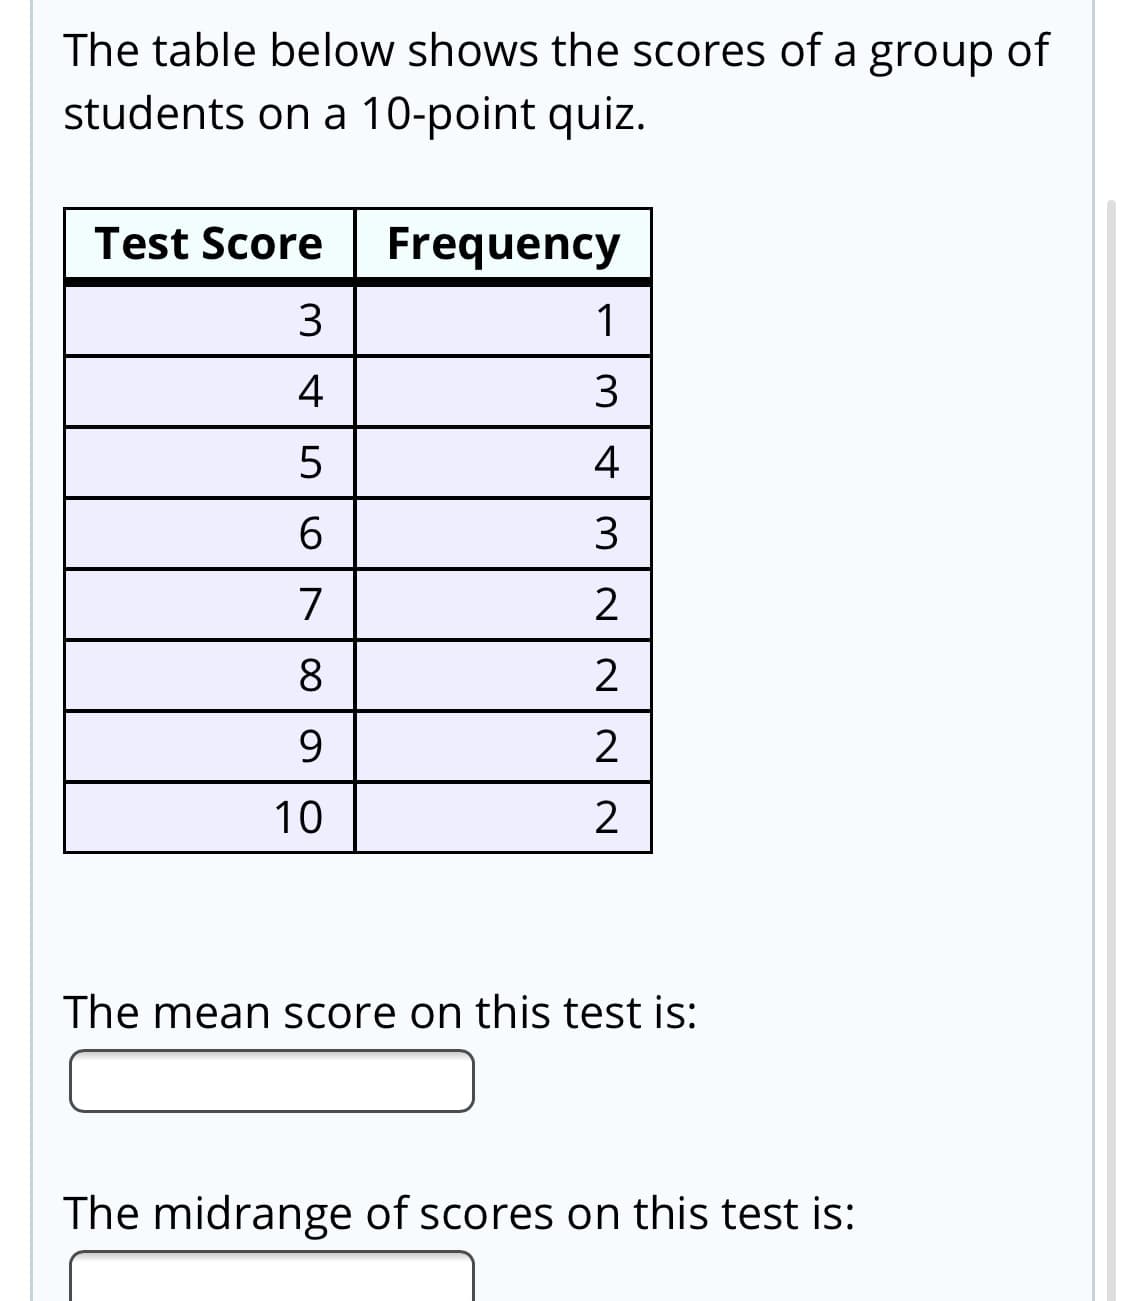 The mean score on this test is:
The midrange of scores on this test is:
